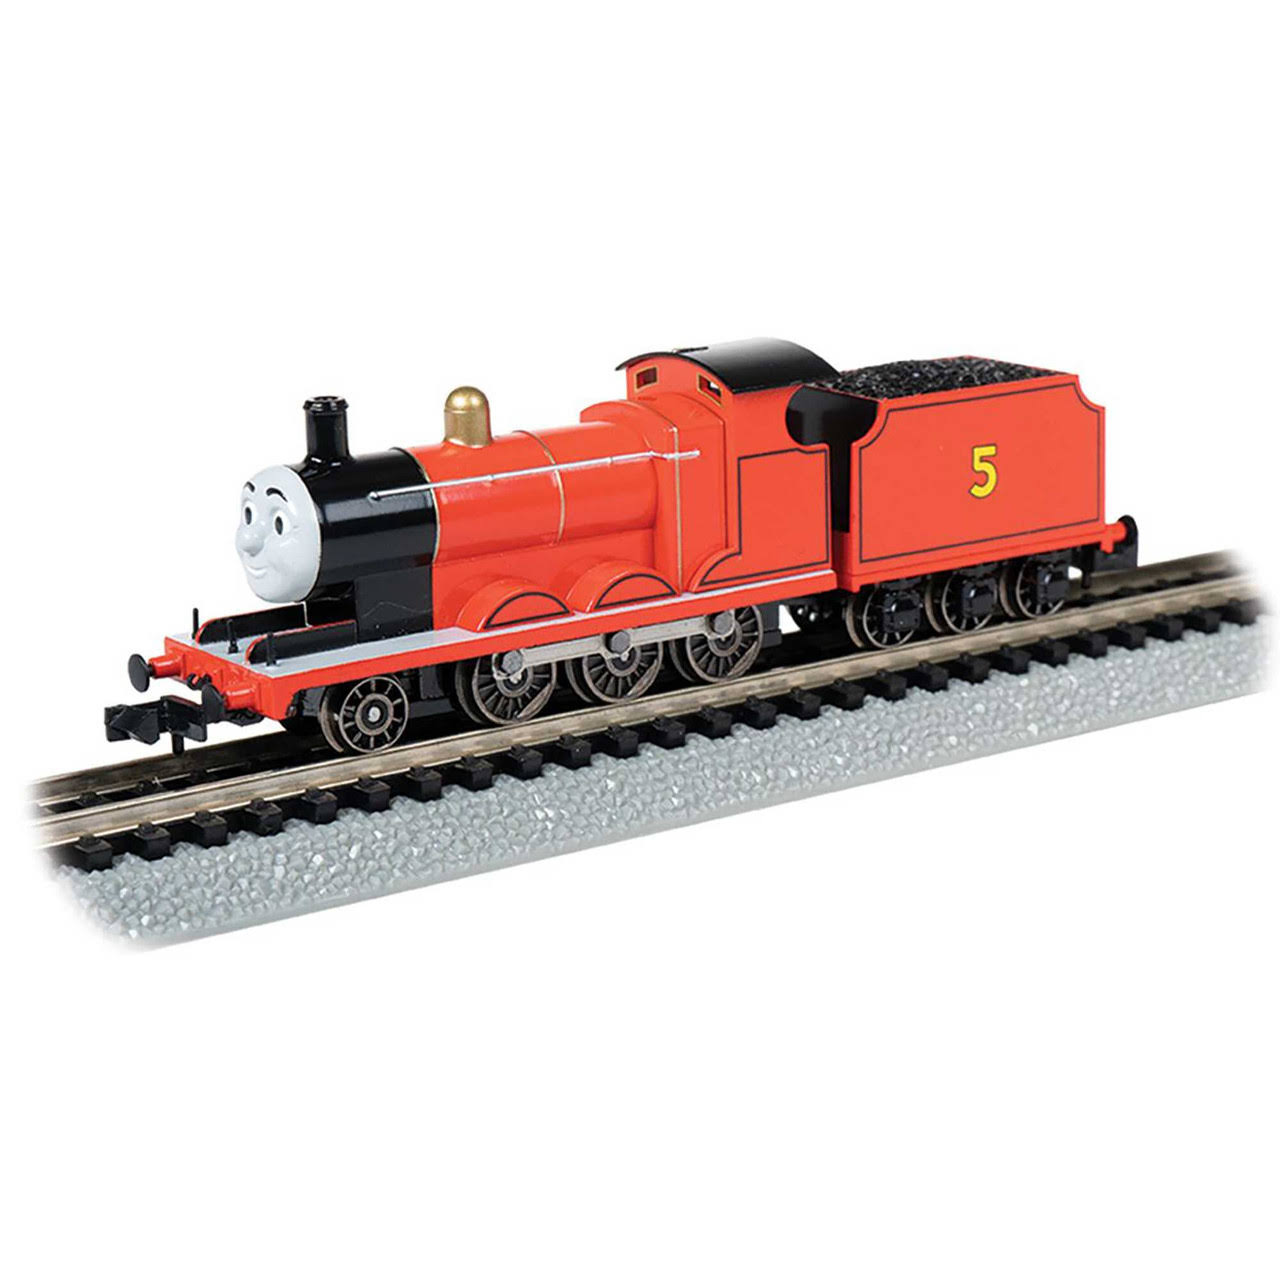 Bachmann Trains - Thomas & Friends - James The Red Engine - N Scale